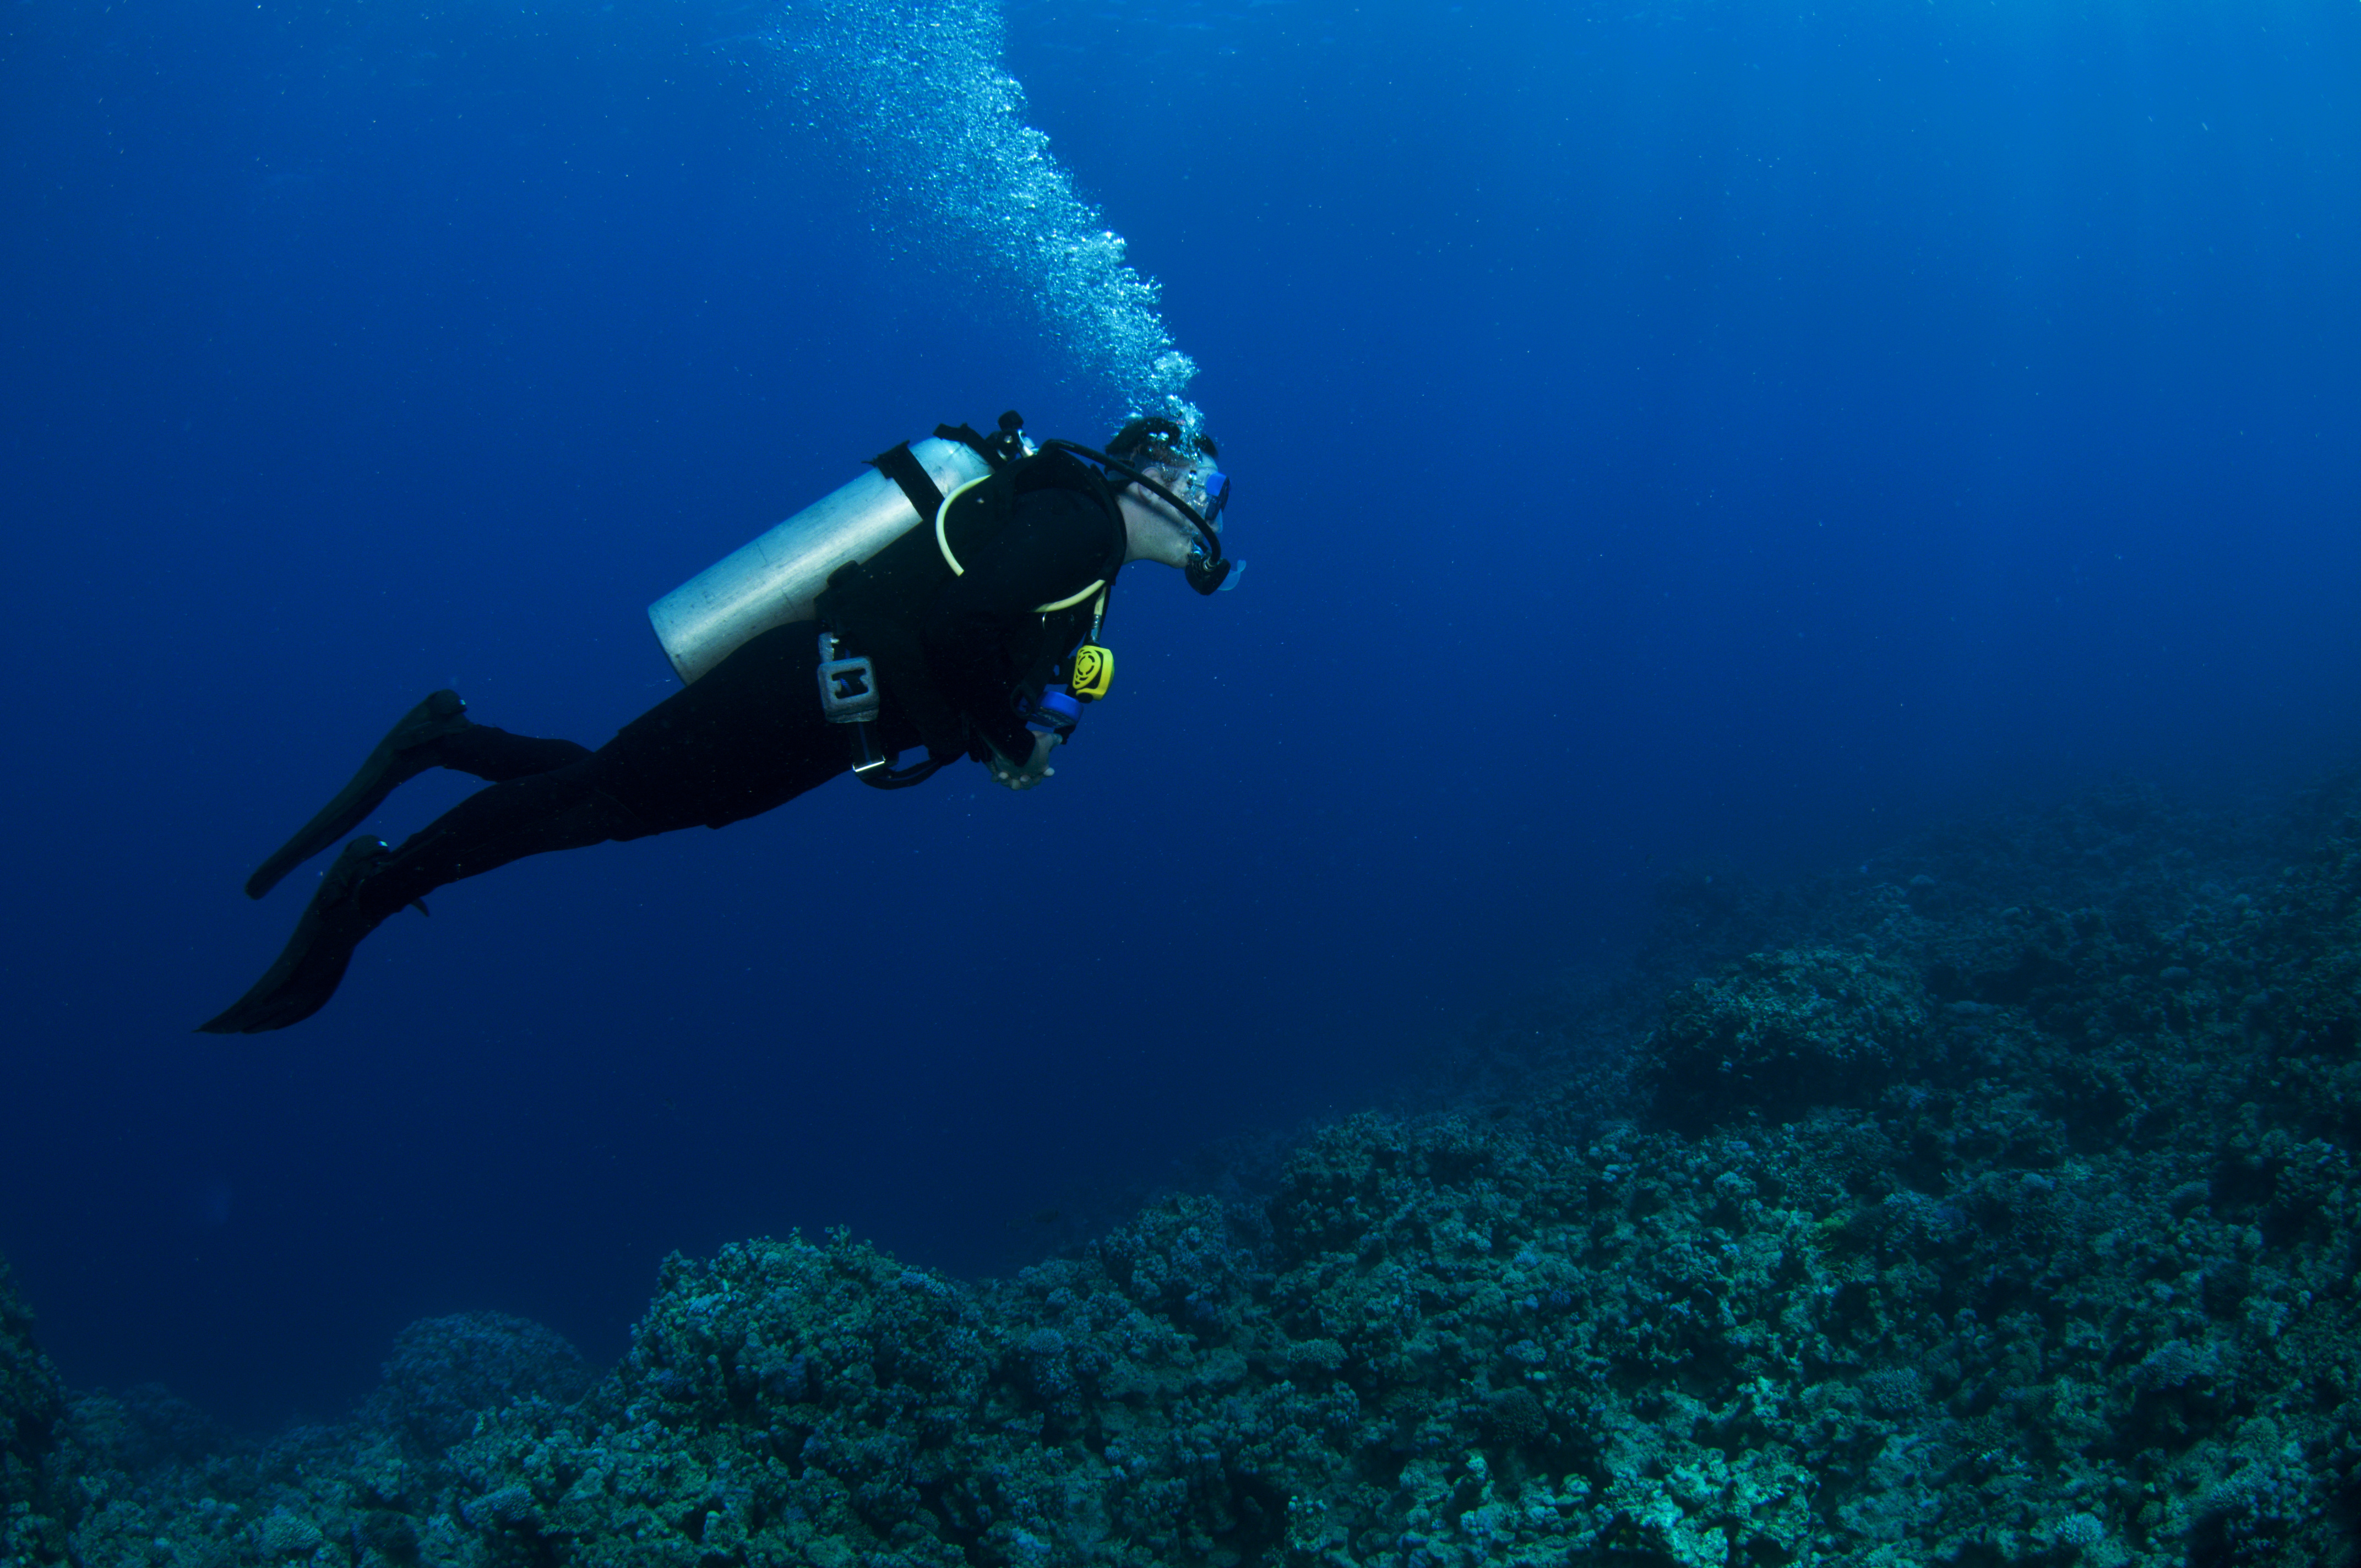 Male diver makes the appropriate safety stops and ascends properly helping him avoid decompression sickness (DCS)